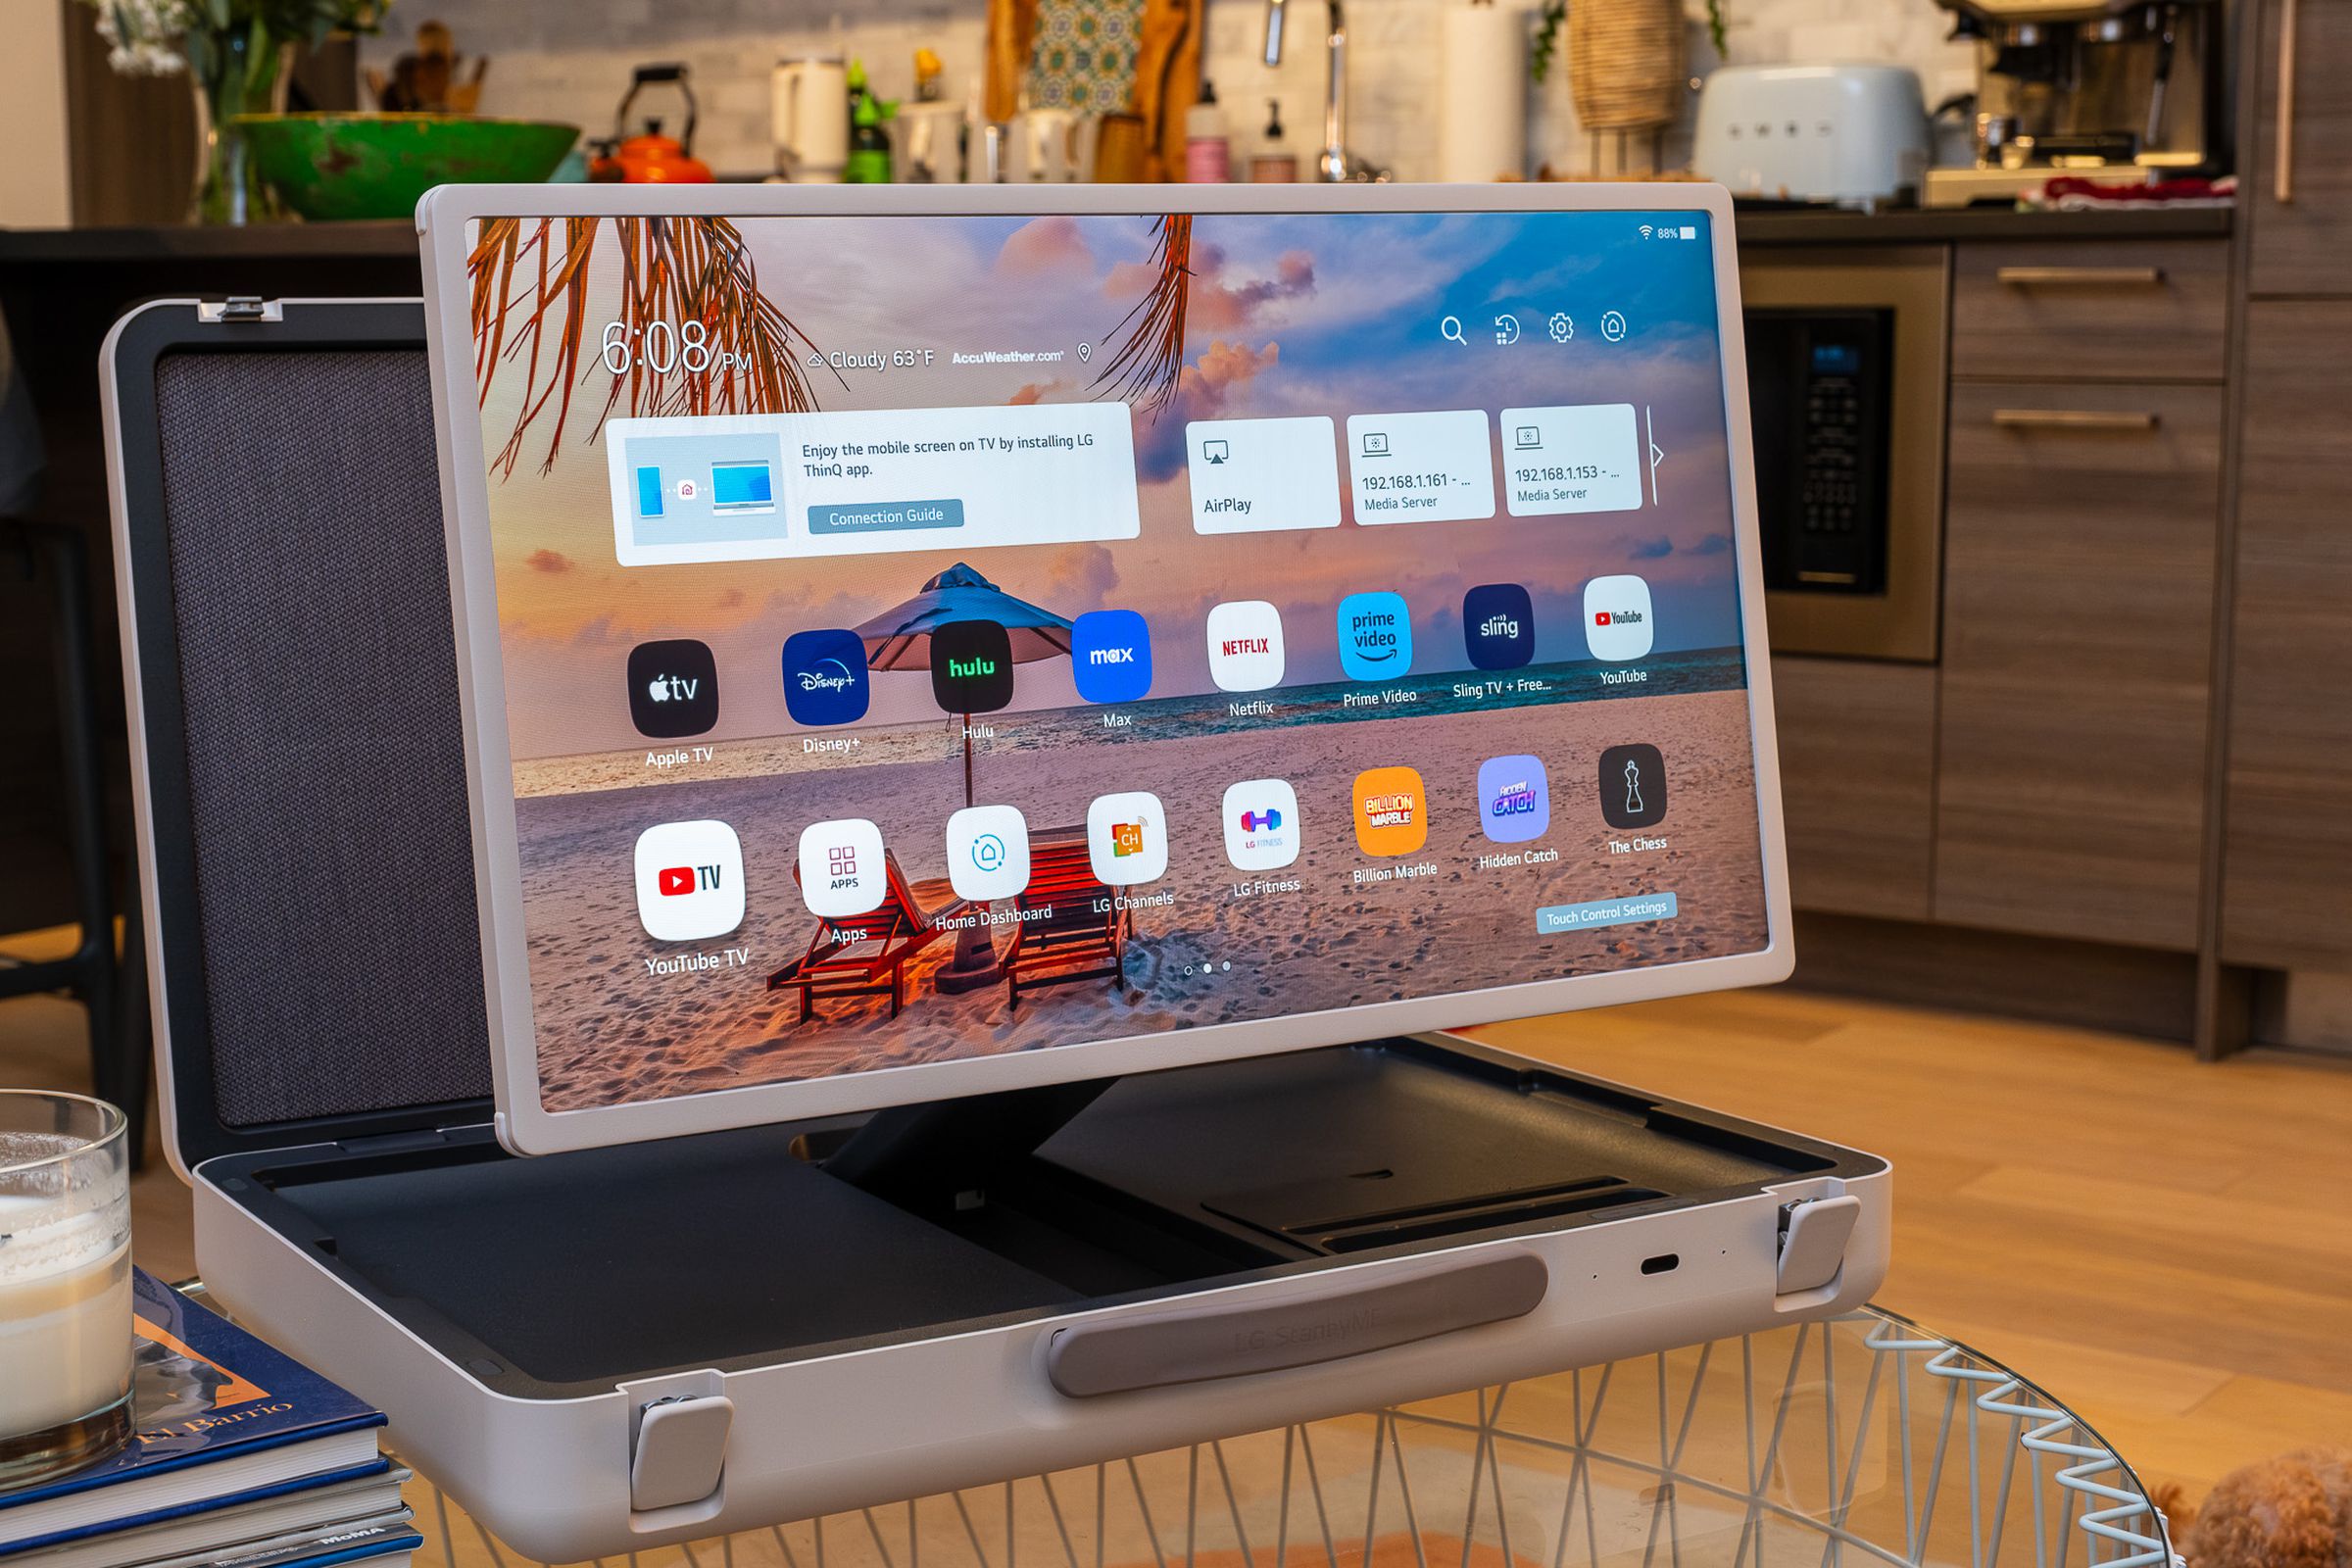 A photo of LG’s StanbyME Go briefcase TV on a living room table with kitchenware in the background.